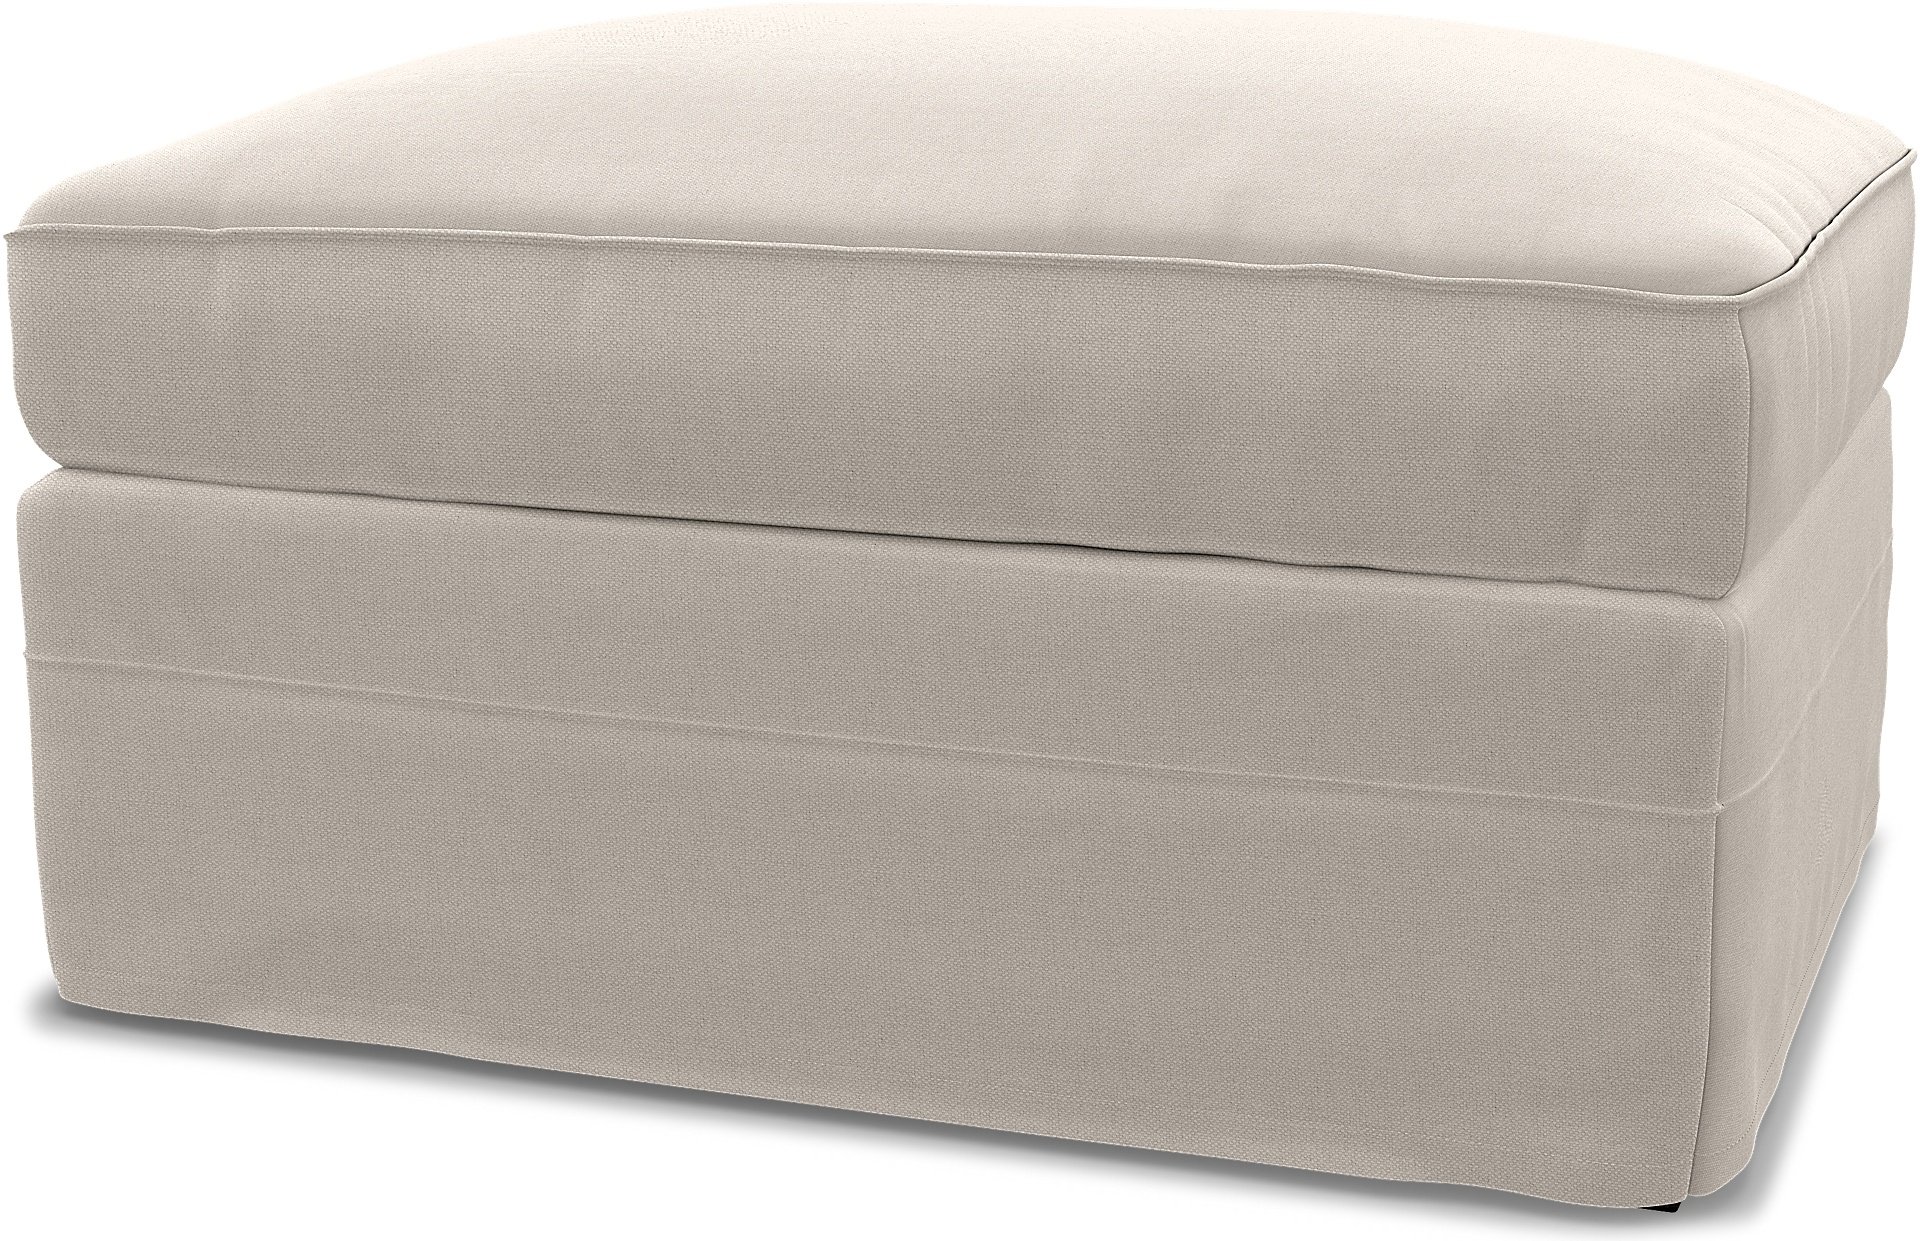 IKEA - Gronlid Footstool with Storage Cover, Chalk, Linen - Bemz